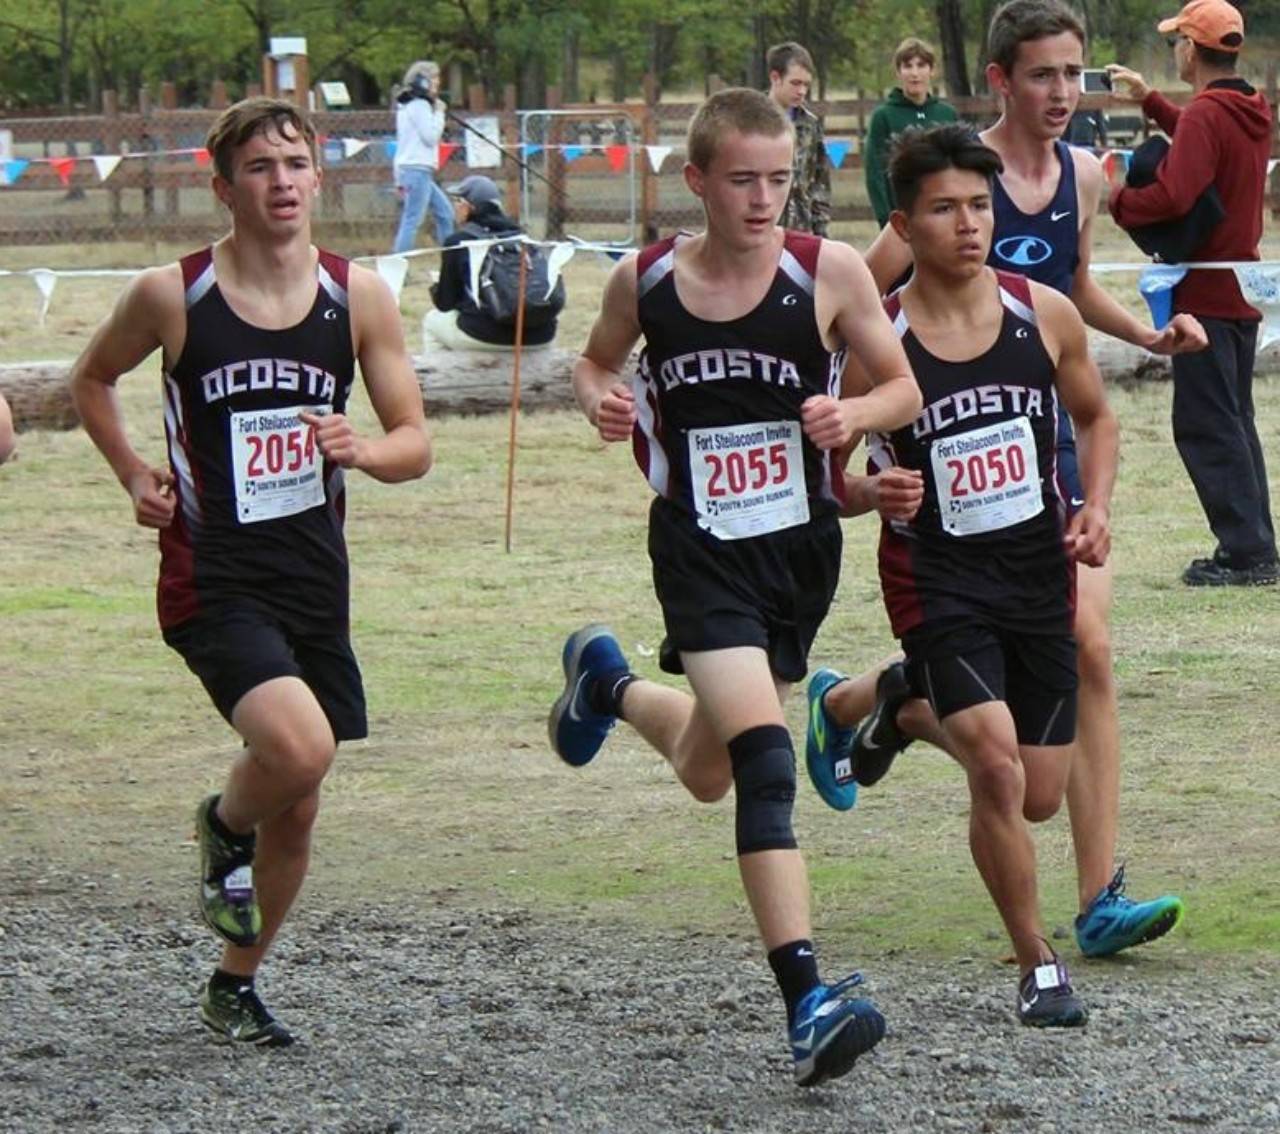 Ocosta boys cross country runners (from left) Daniel Quinby, Dylan Todd, Alex Bailey race at the Fort Steliacoom Invitational on Saturday in Lakewood. (Photo by Aaron Anderson)